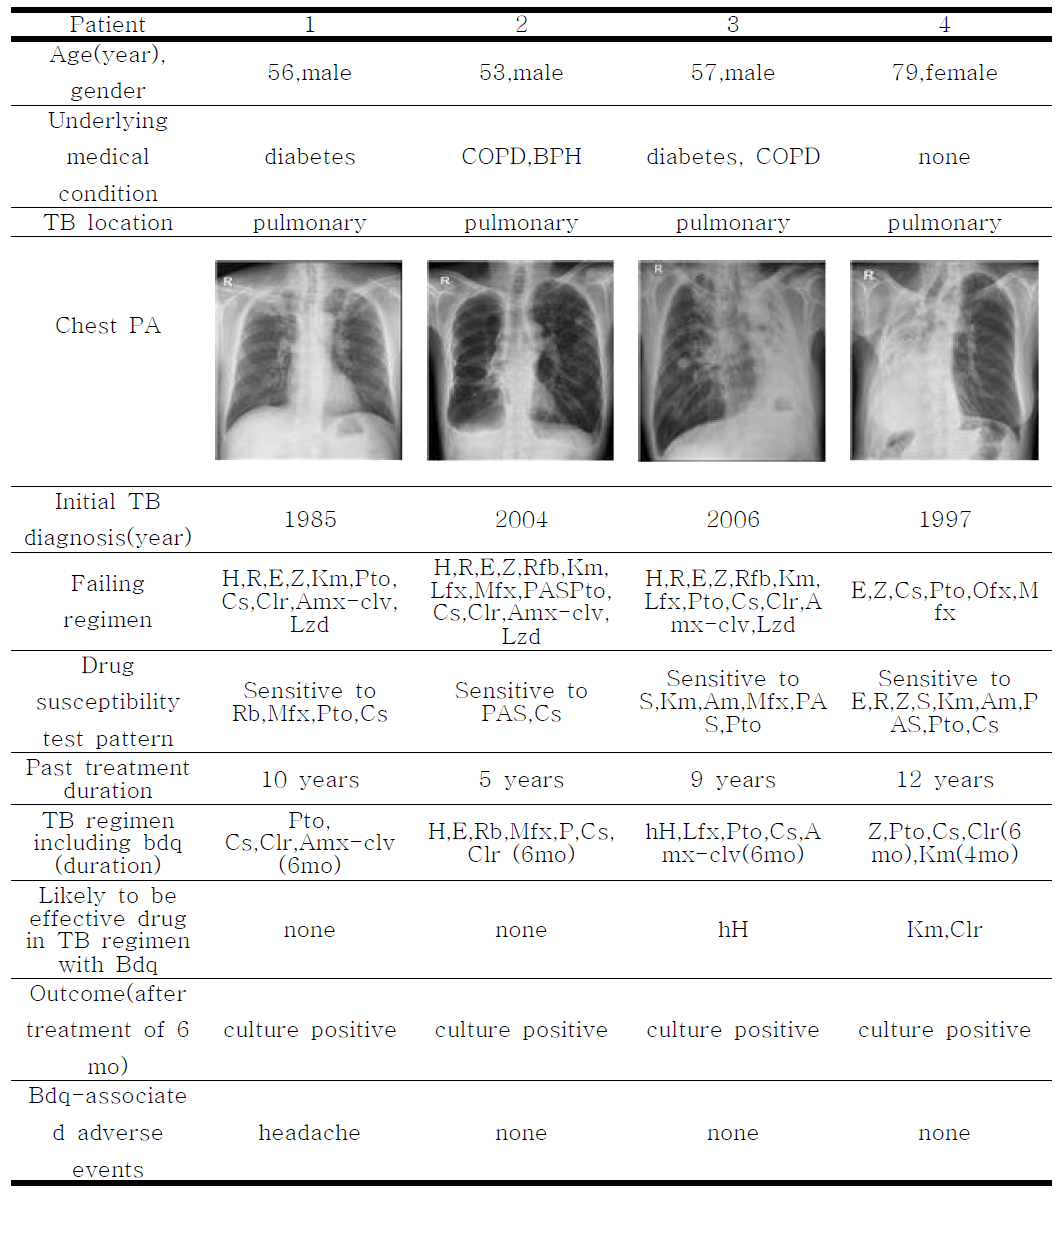 clinical and microbiological features of 4 cases of chronic intractable Tuberculosis treated with bedaquiline-containing regimens.